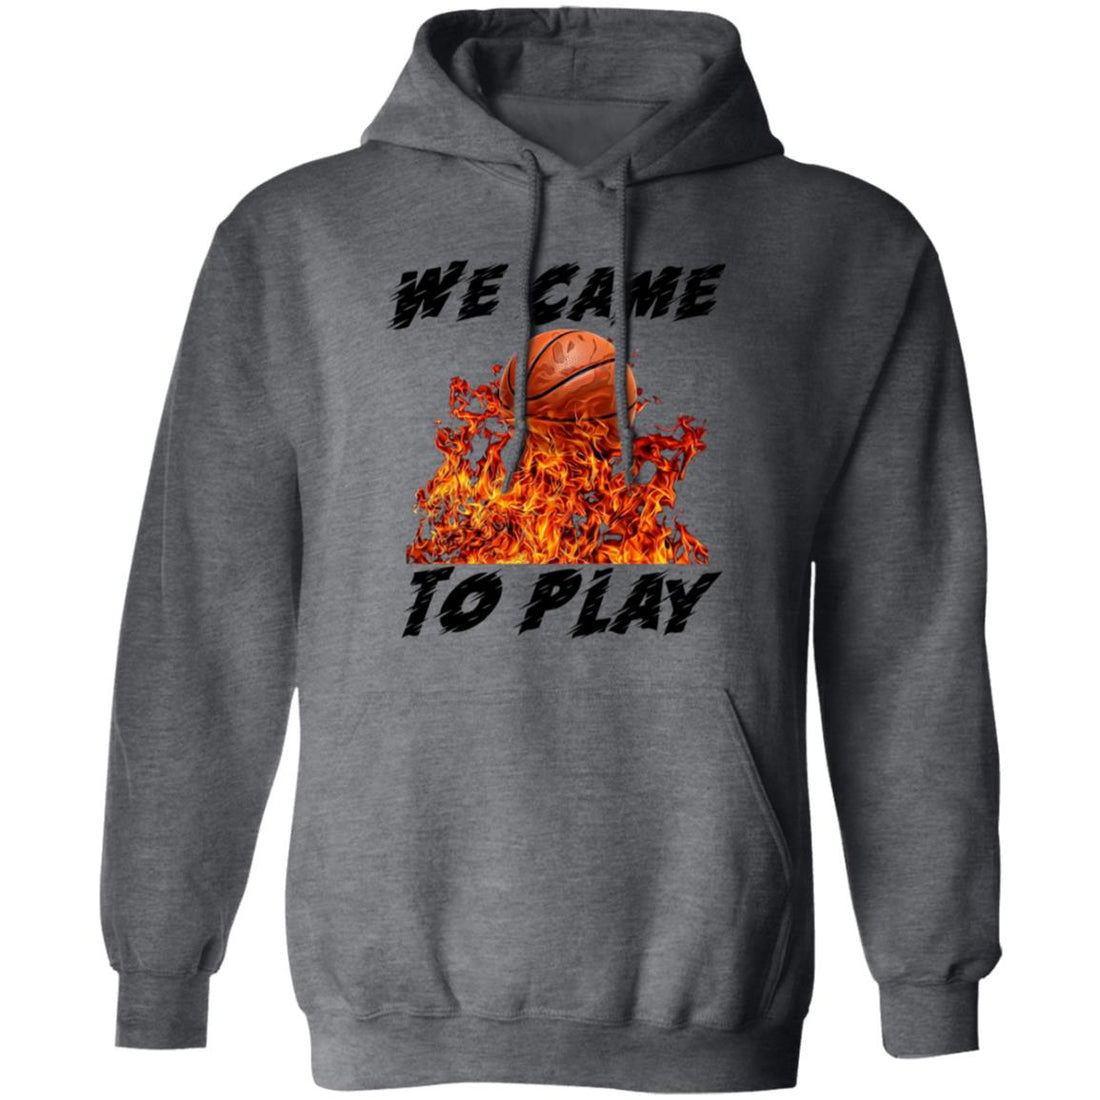 We Came To Play Basketball Pullover Hoodie - Sweatshirts - Positively Sassy - We Came To Play Basketball Pullover Hoodie